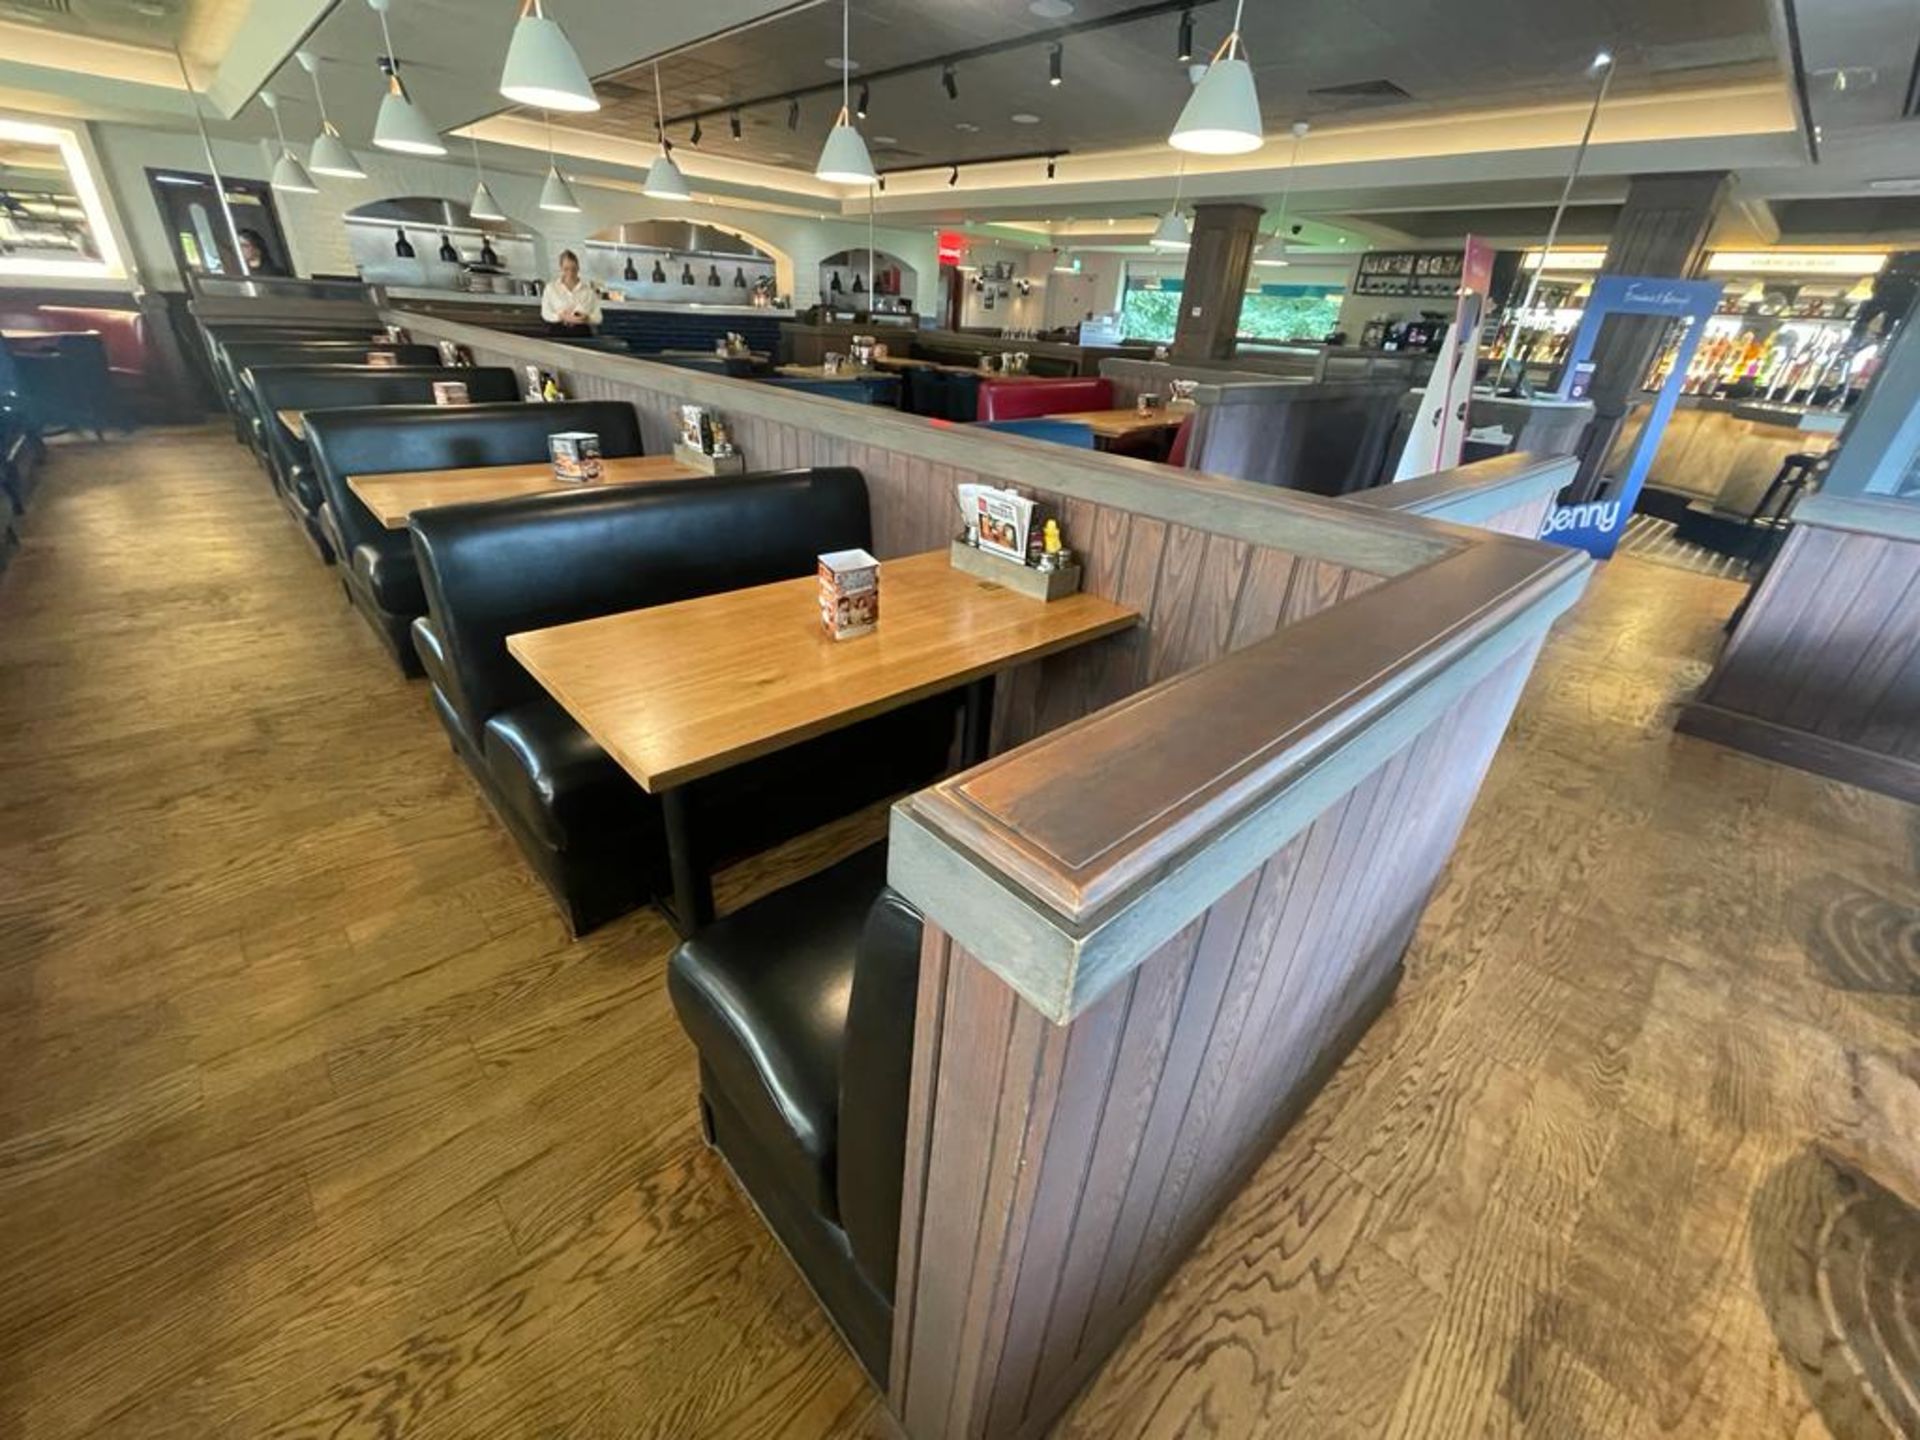 1 x Collection of Restaurant Booth Seating in a Black Faux Leather Upholstery - Image 16 of 16